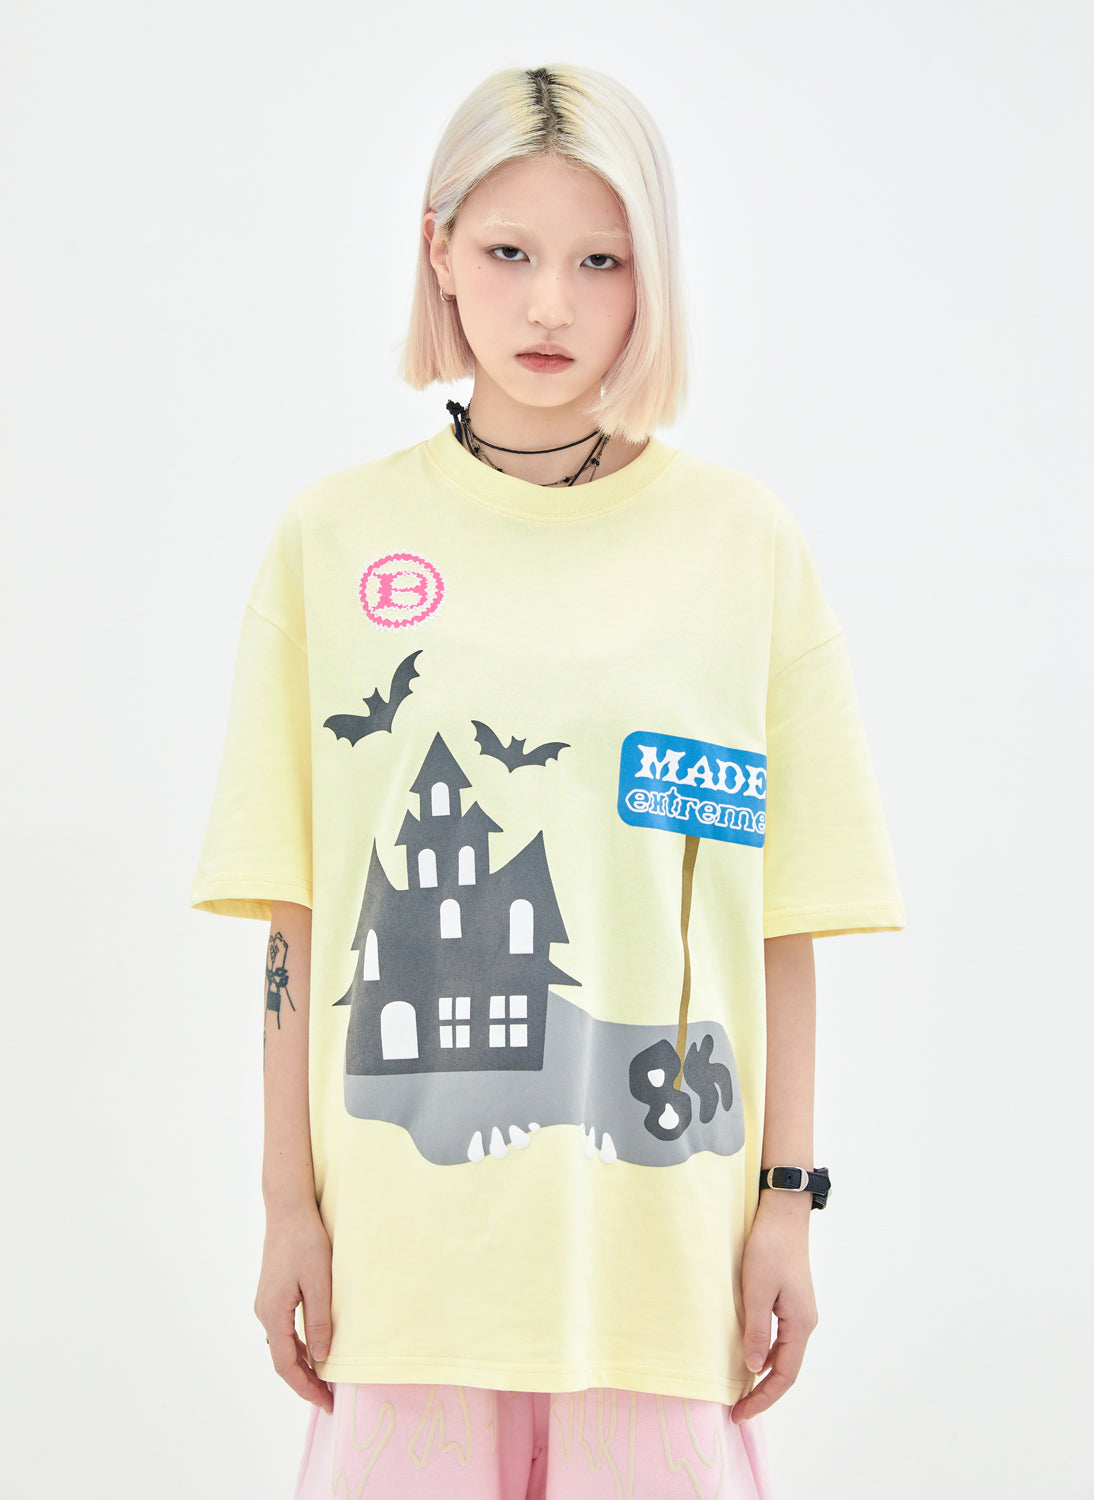 BAT IN THE CITY T-SHIRT